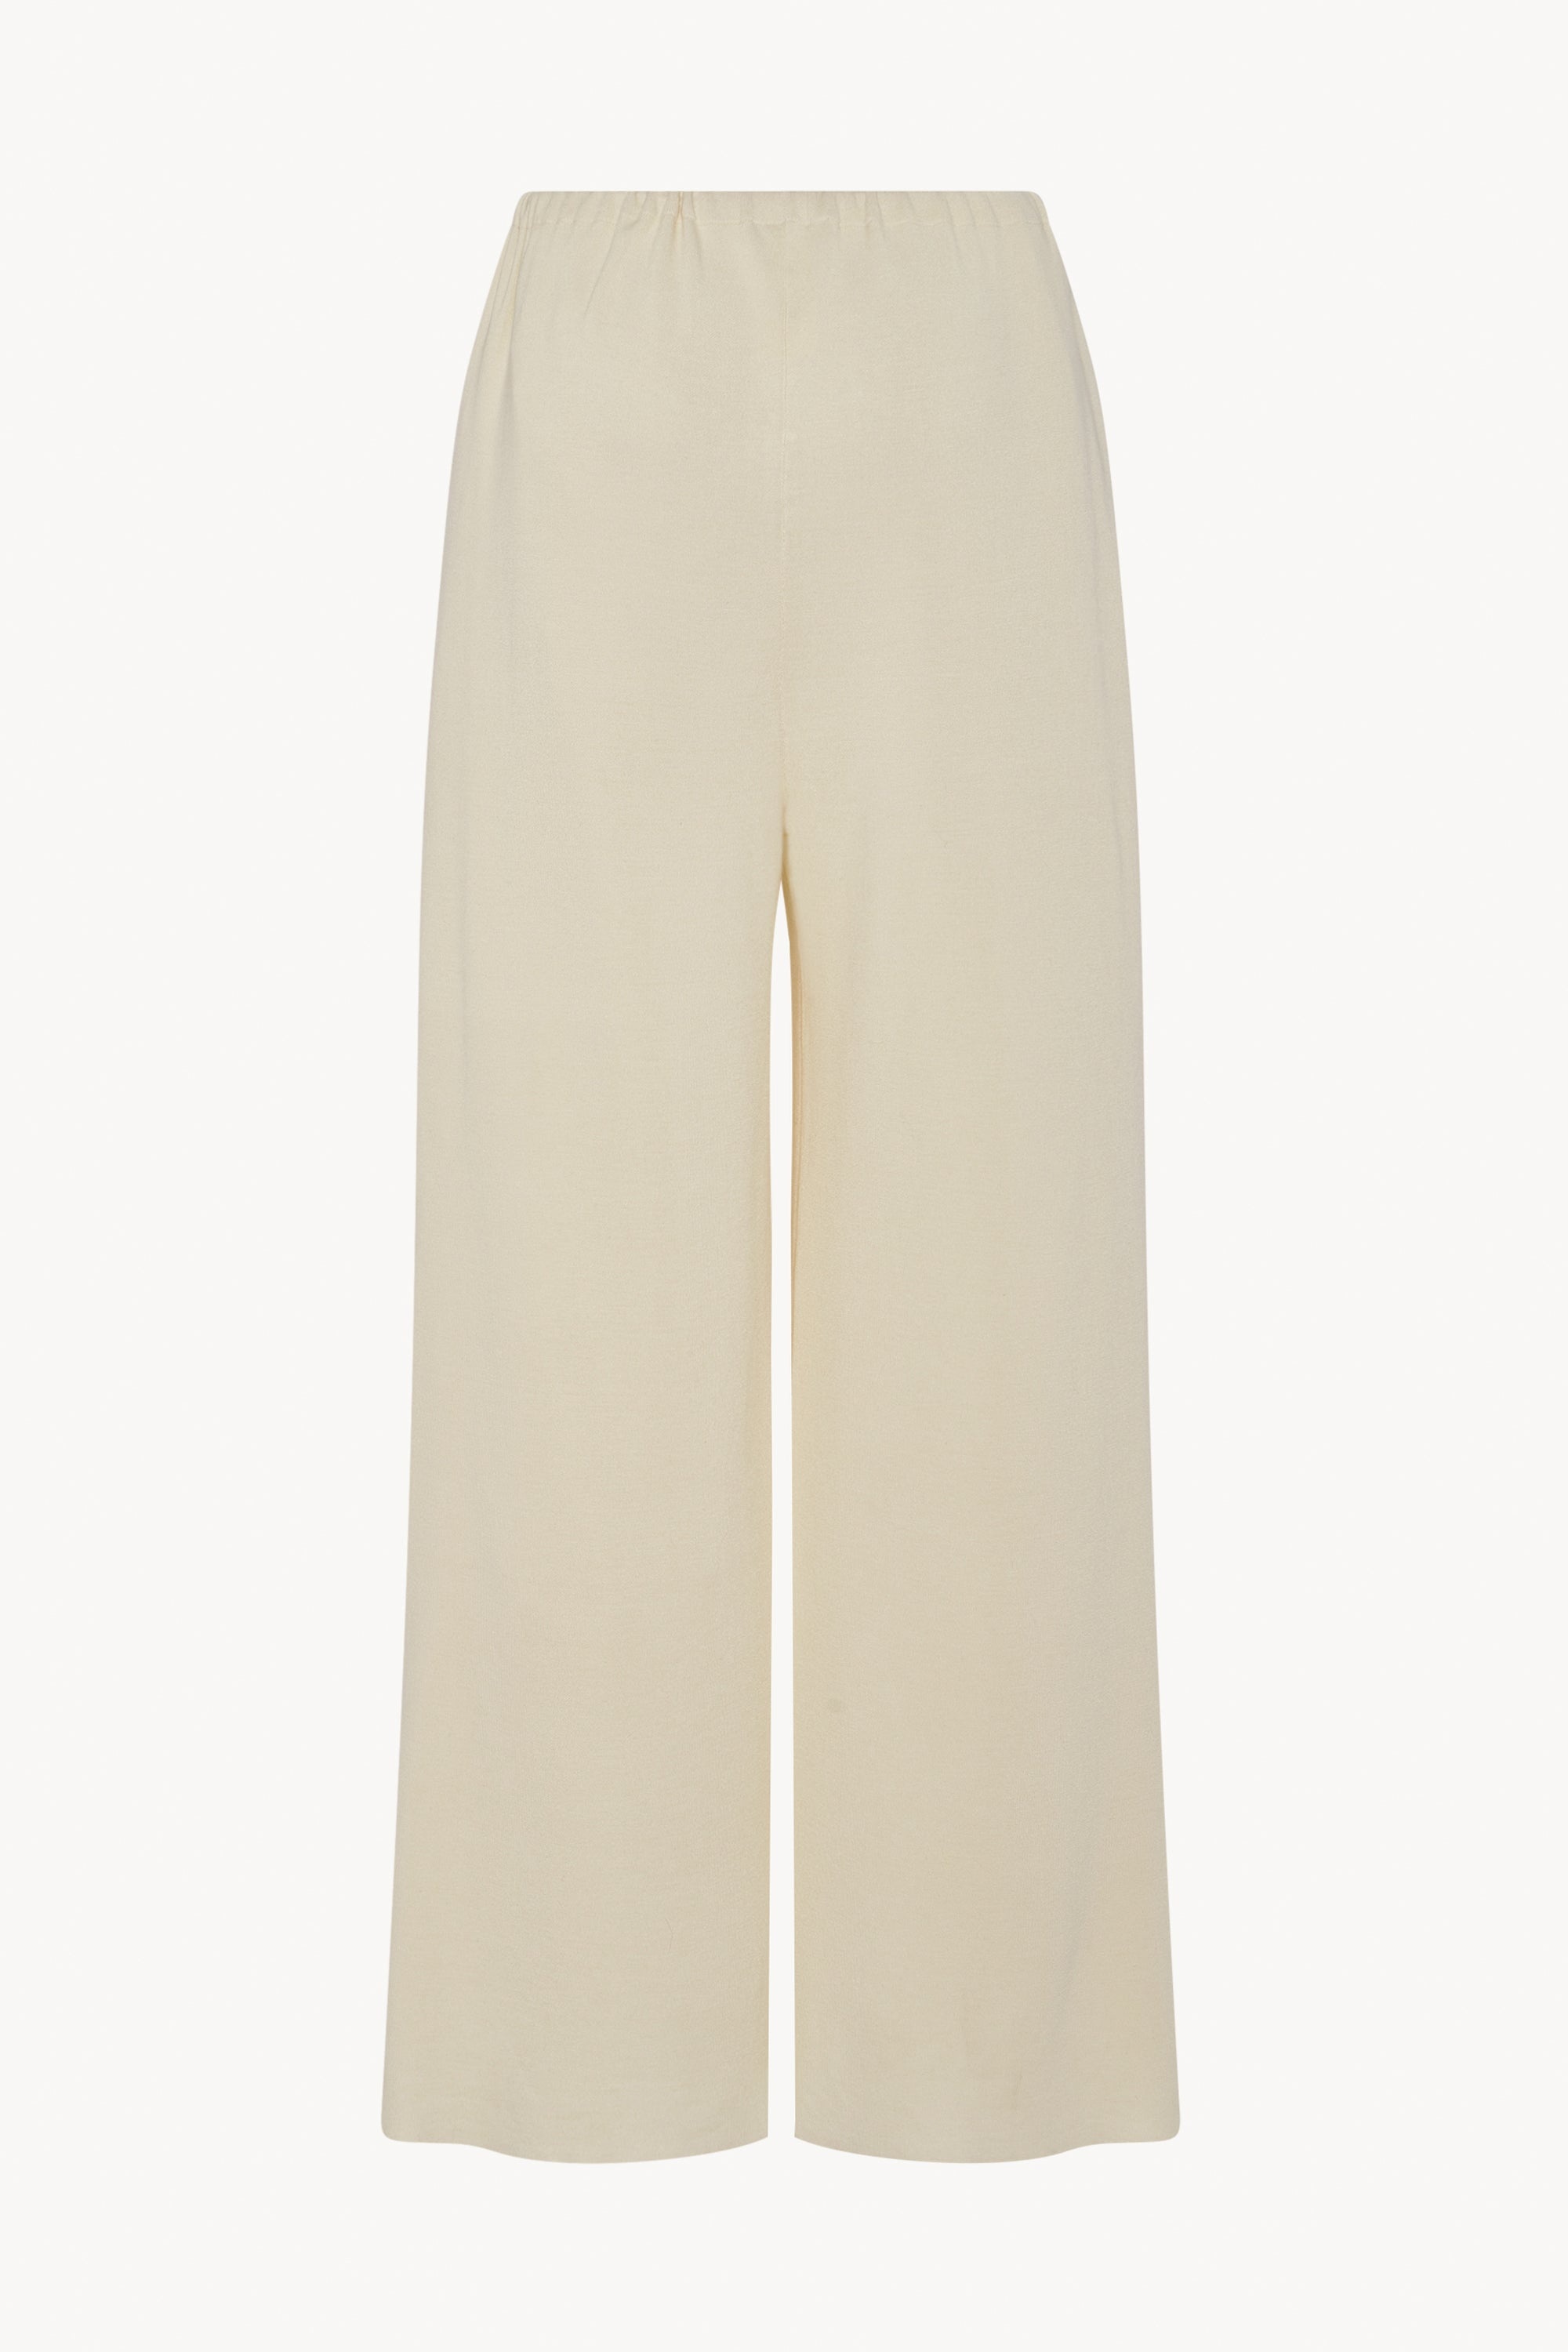 Delphine Pant in Silk and Cotton - 2